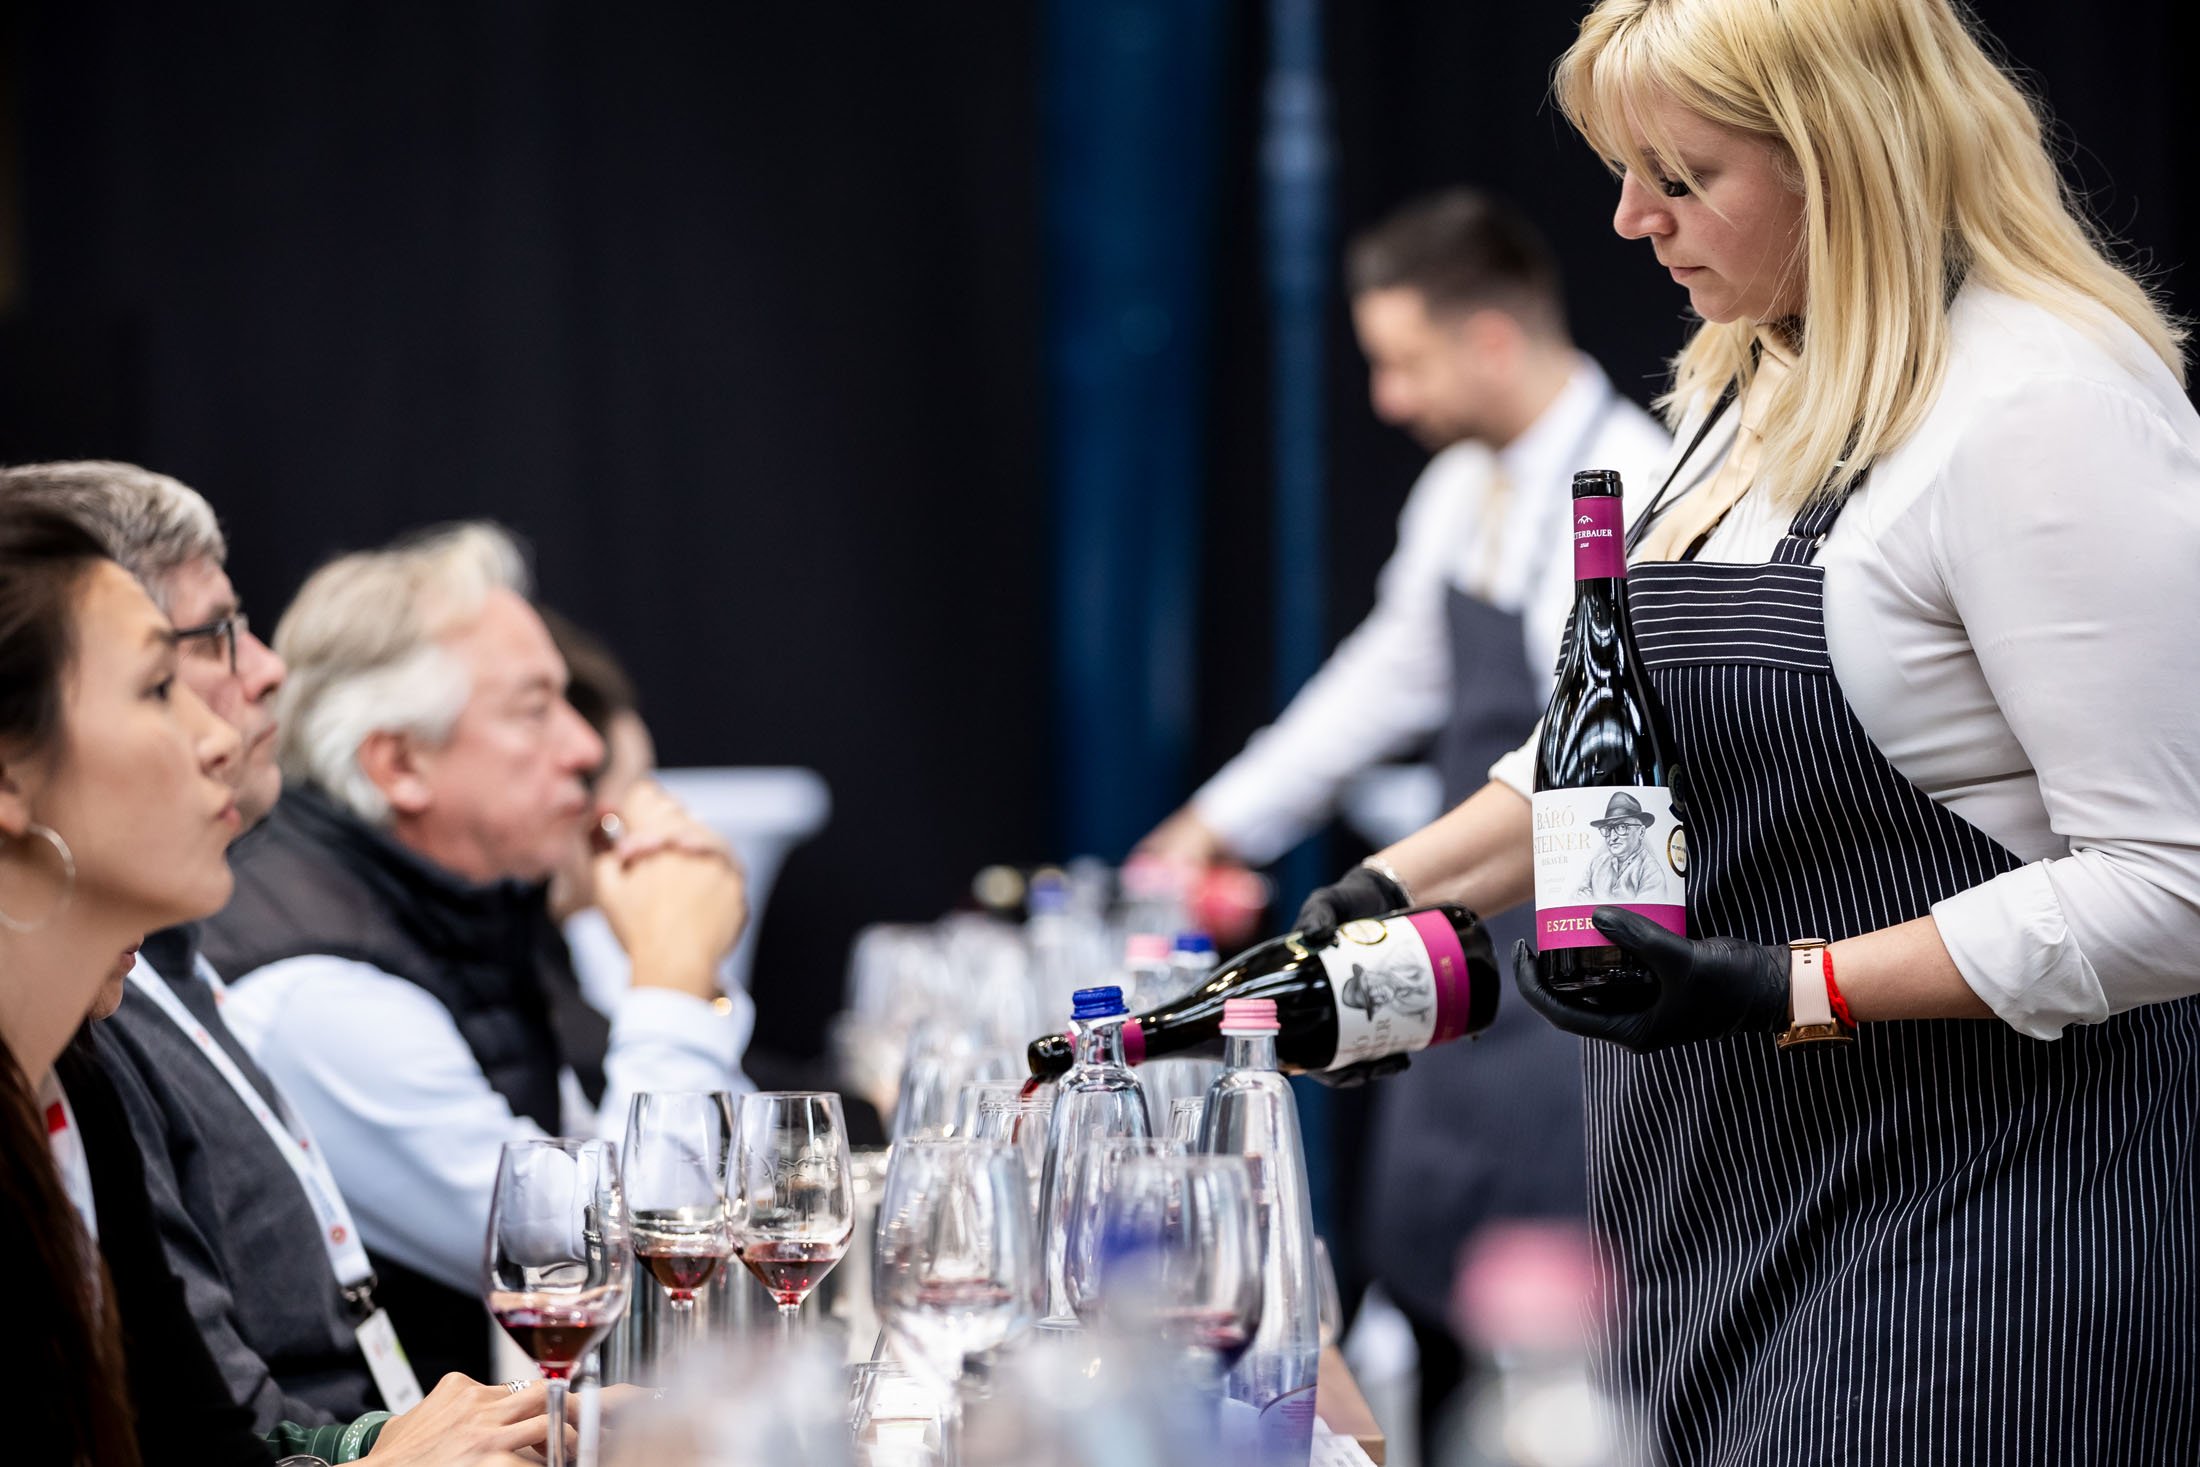 The Hungarian Wine Summit, the largest international wine event in Hungary, has drawn to a close